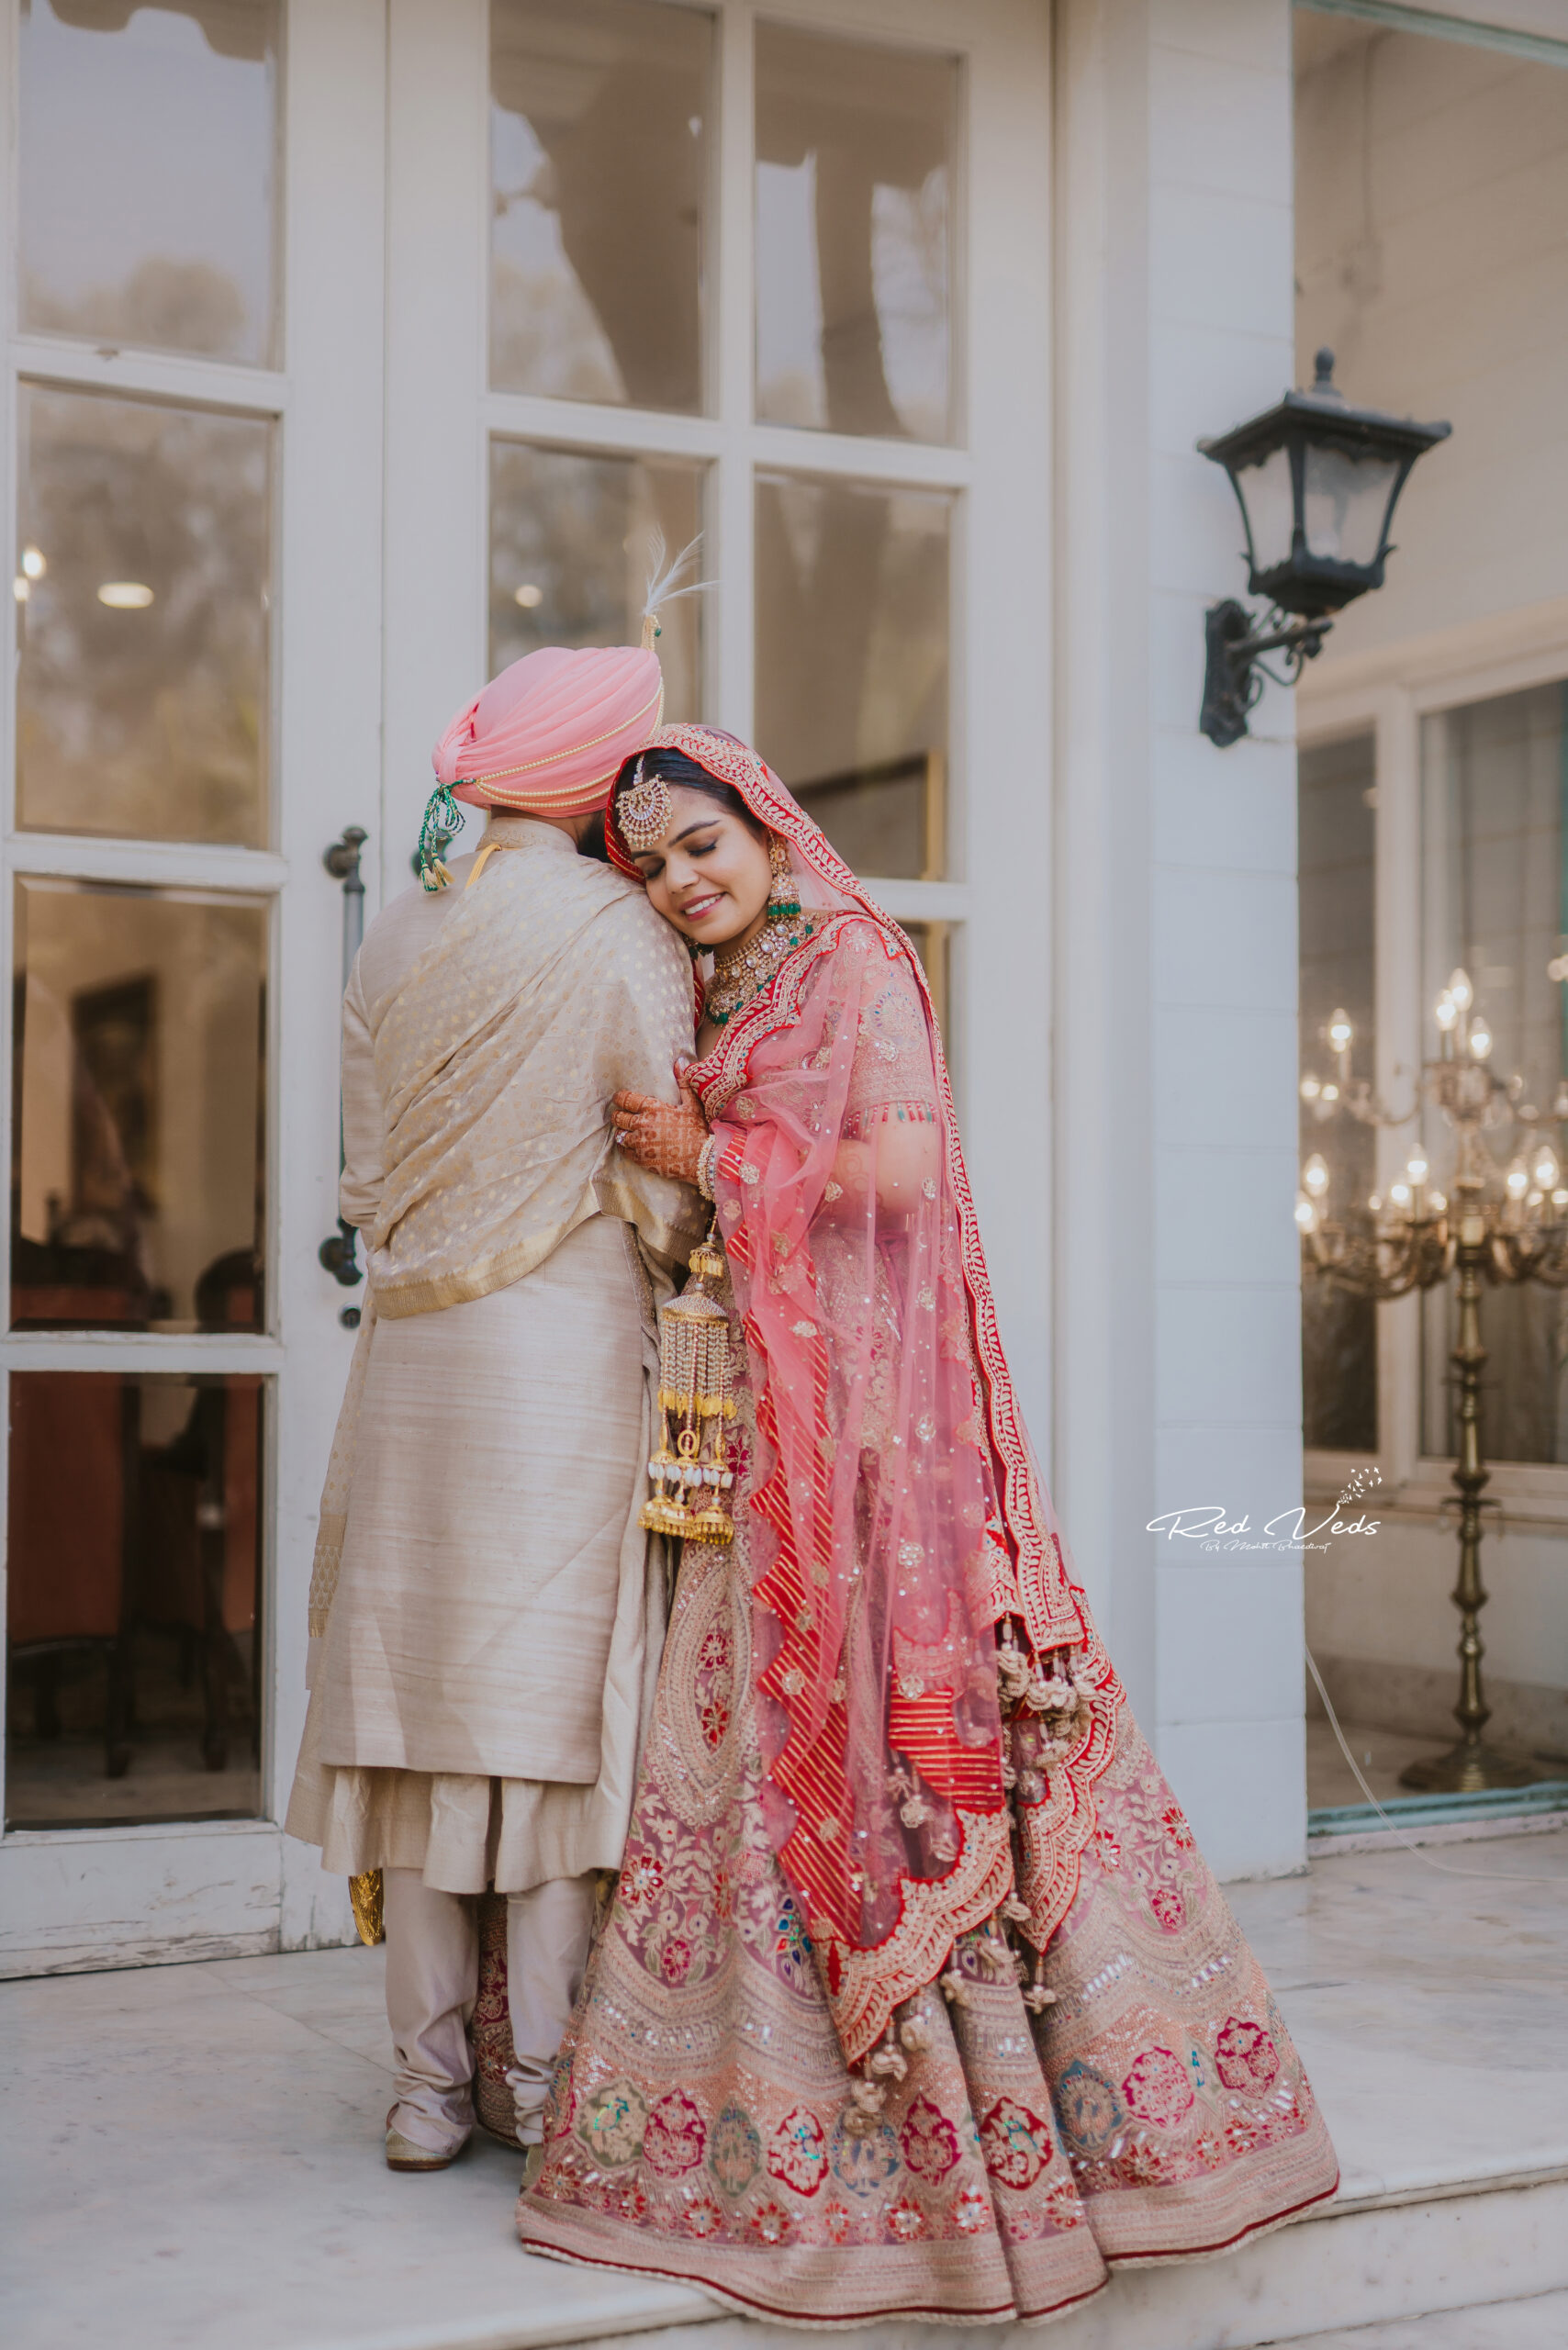 Candid Vs Traditional Wedding Photography: Which To Choose?